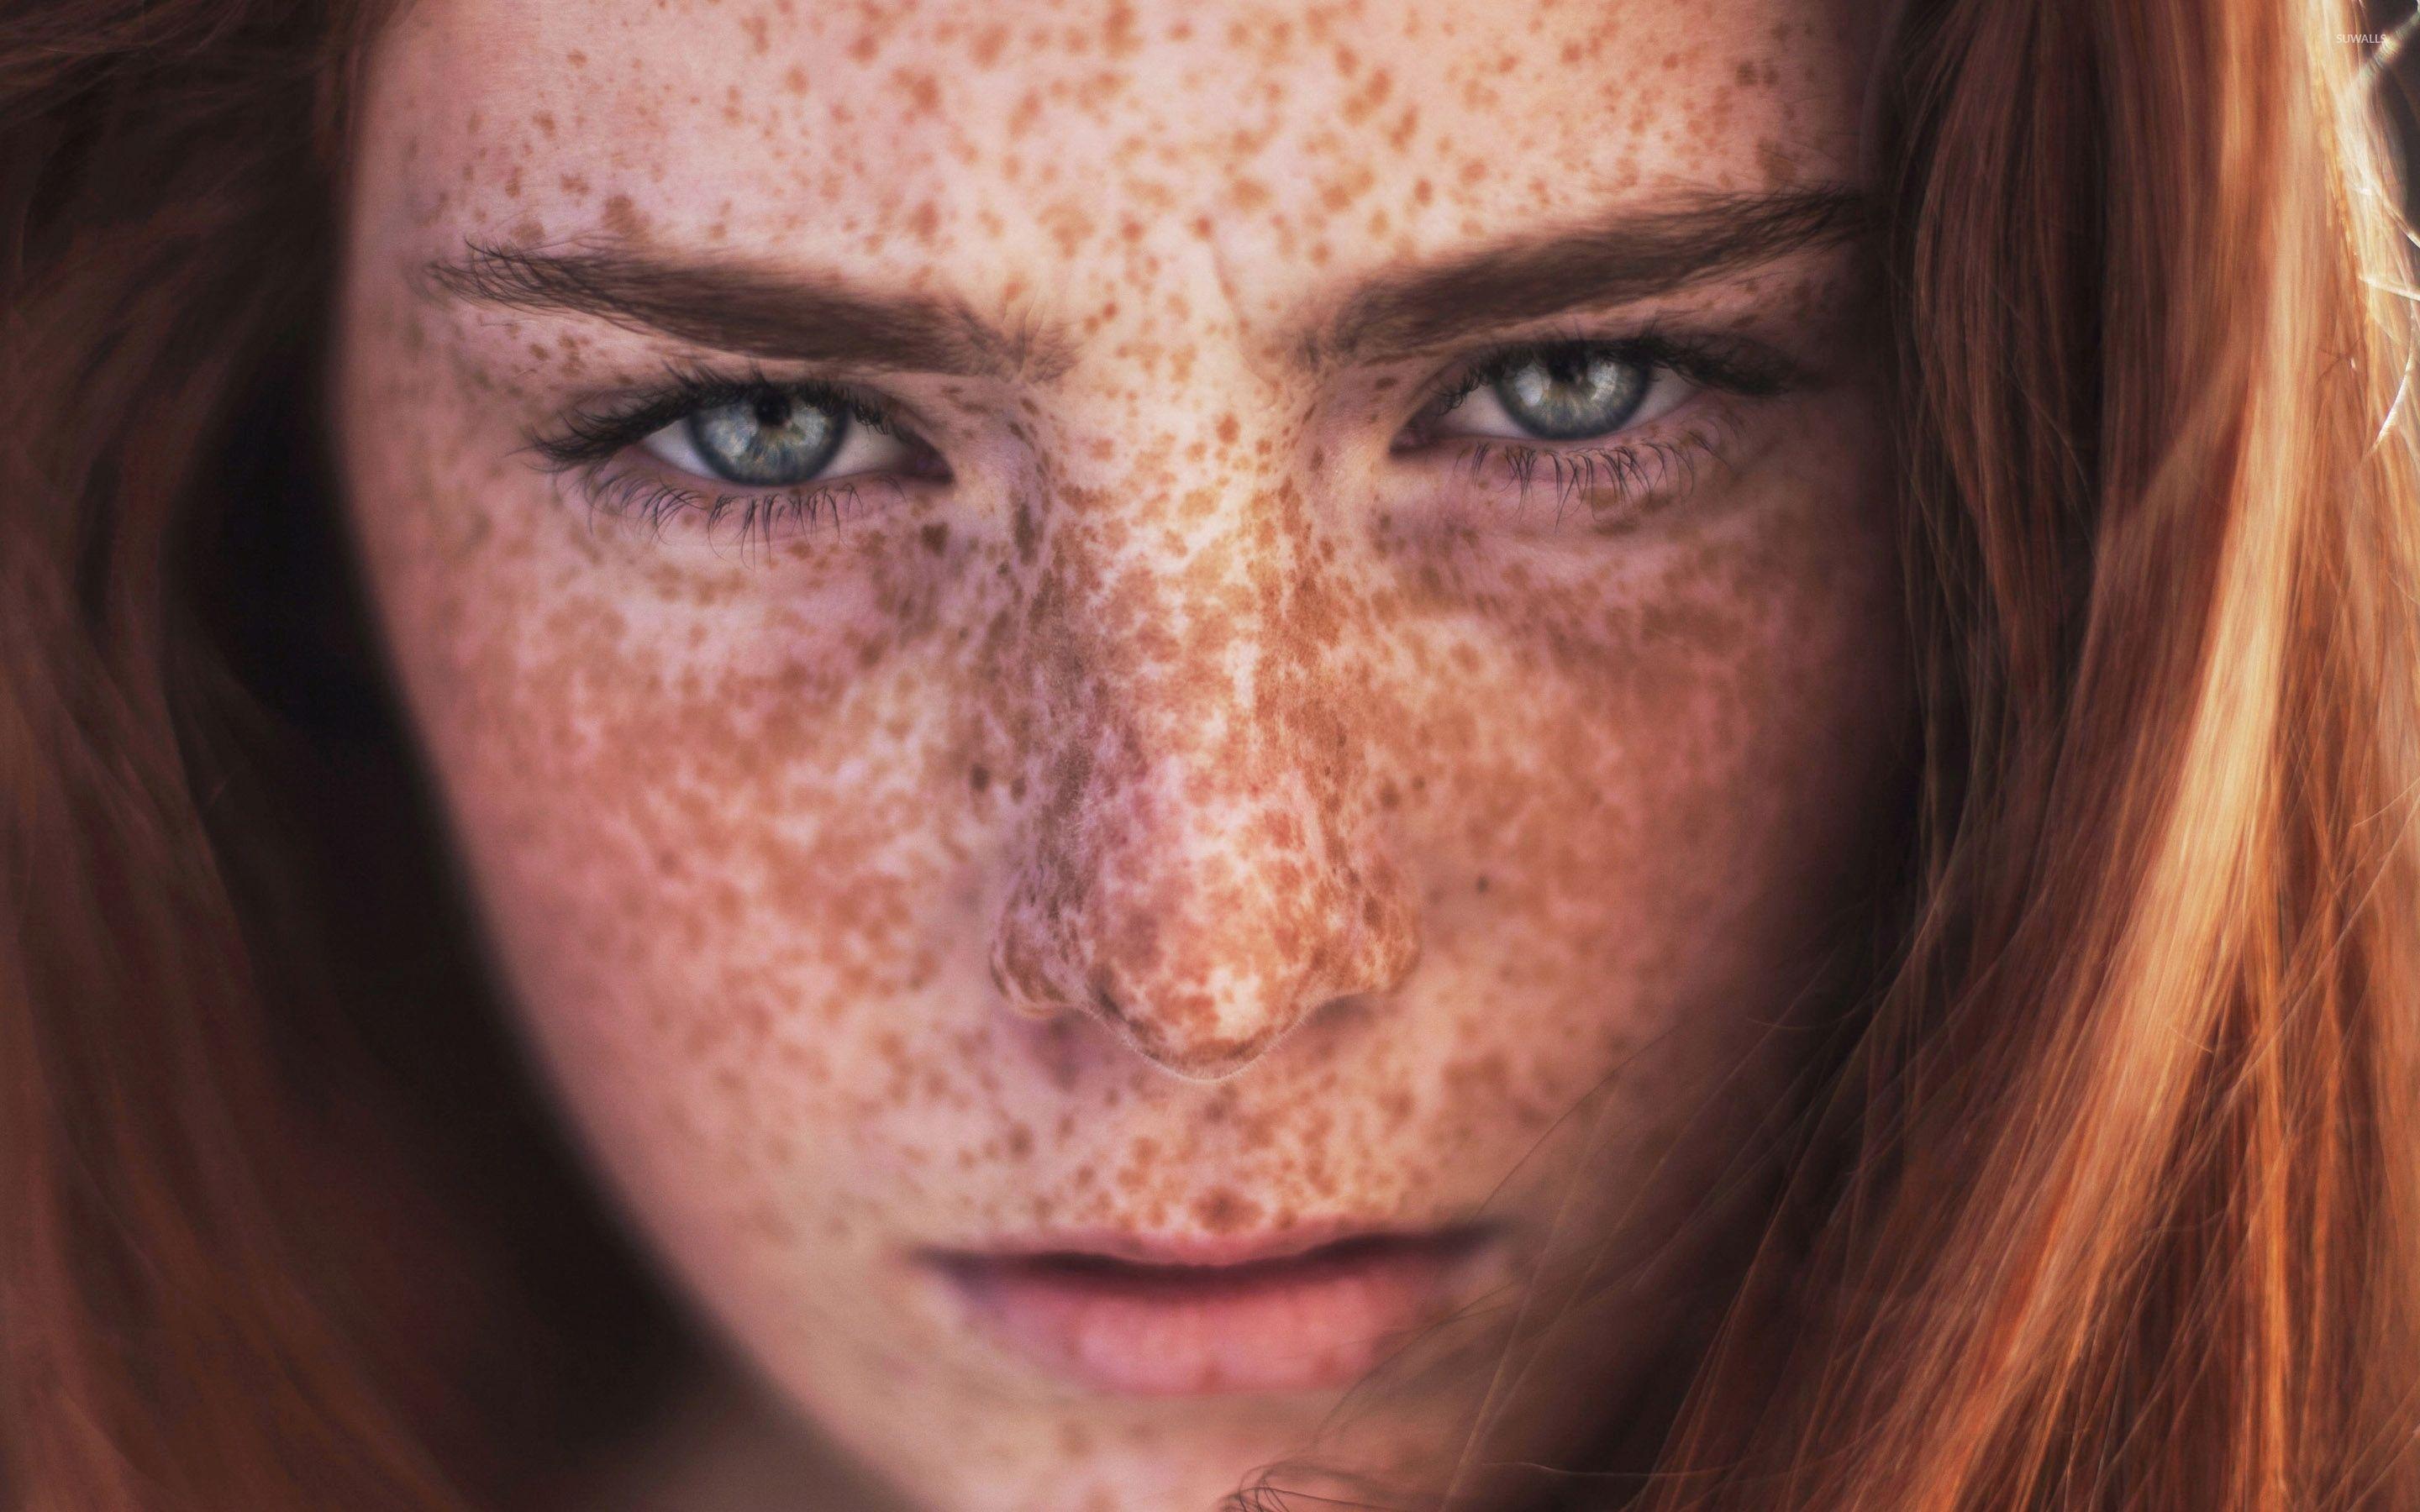 5. "Step-by-Step Guide to Drawing Auburn Hair, Freckles, and Blue Eyes" - wide 10